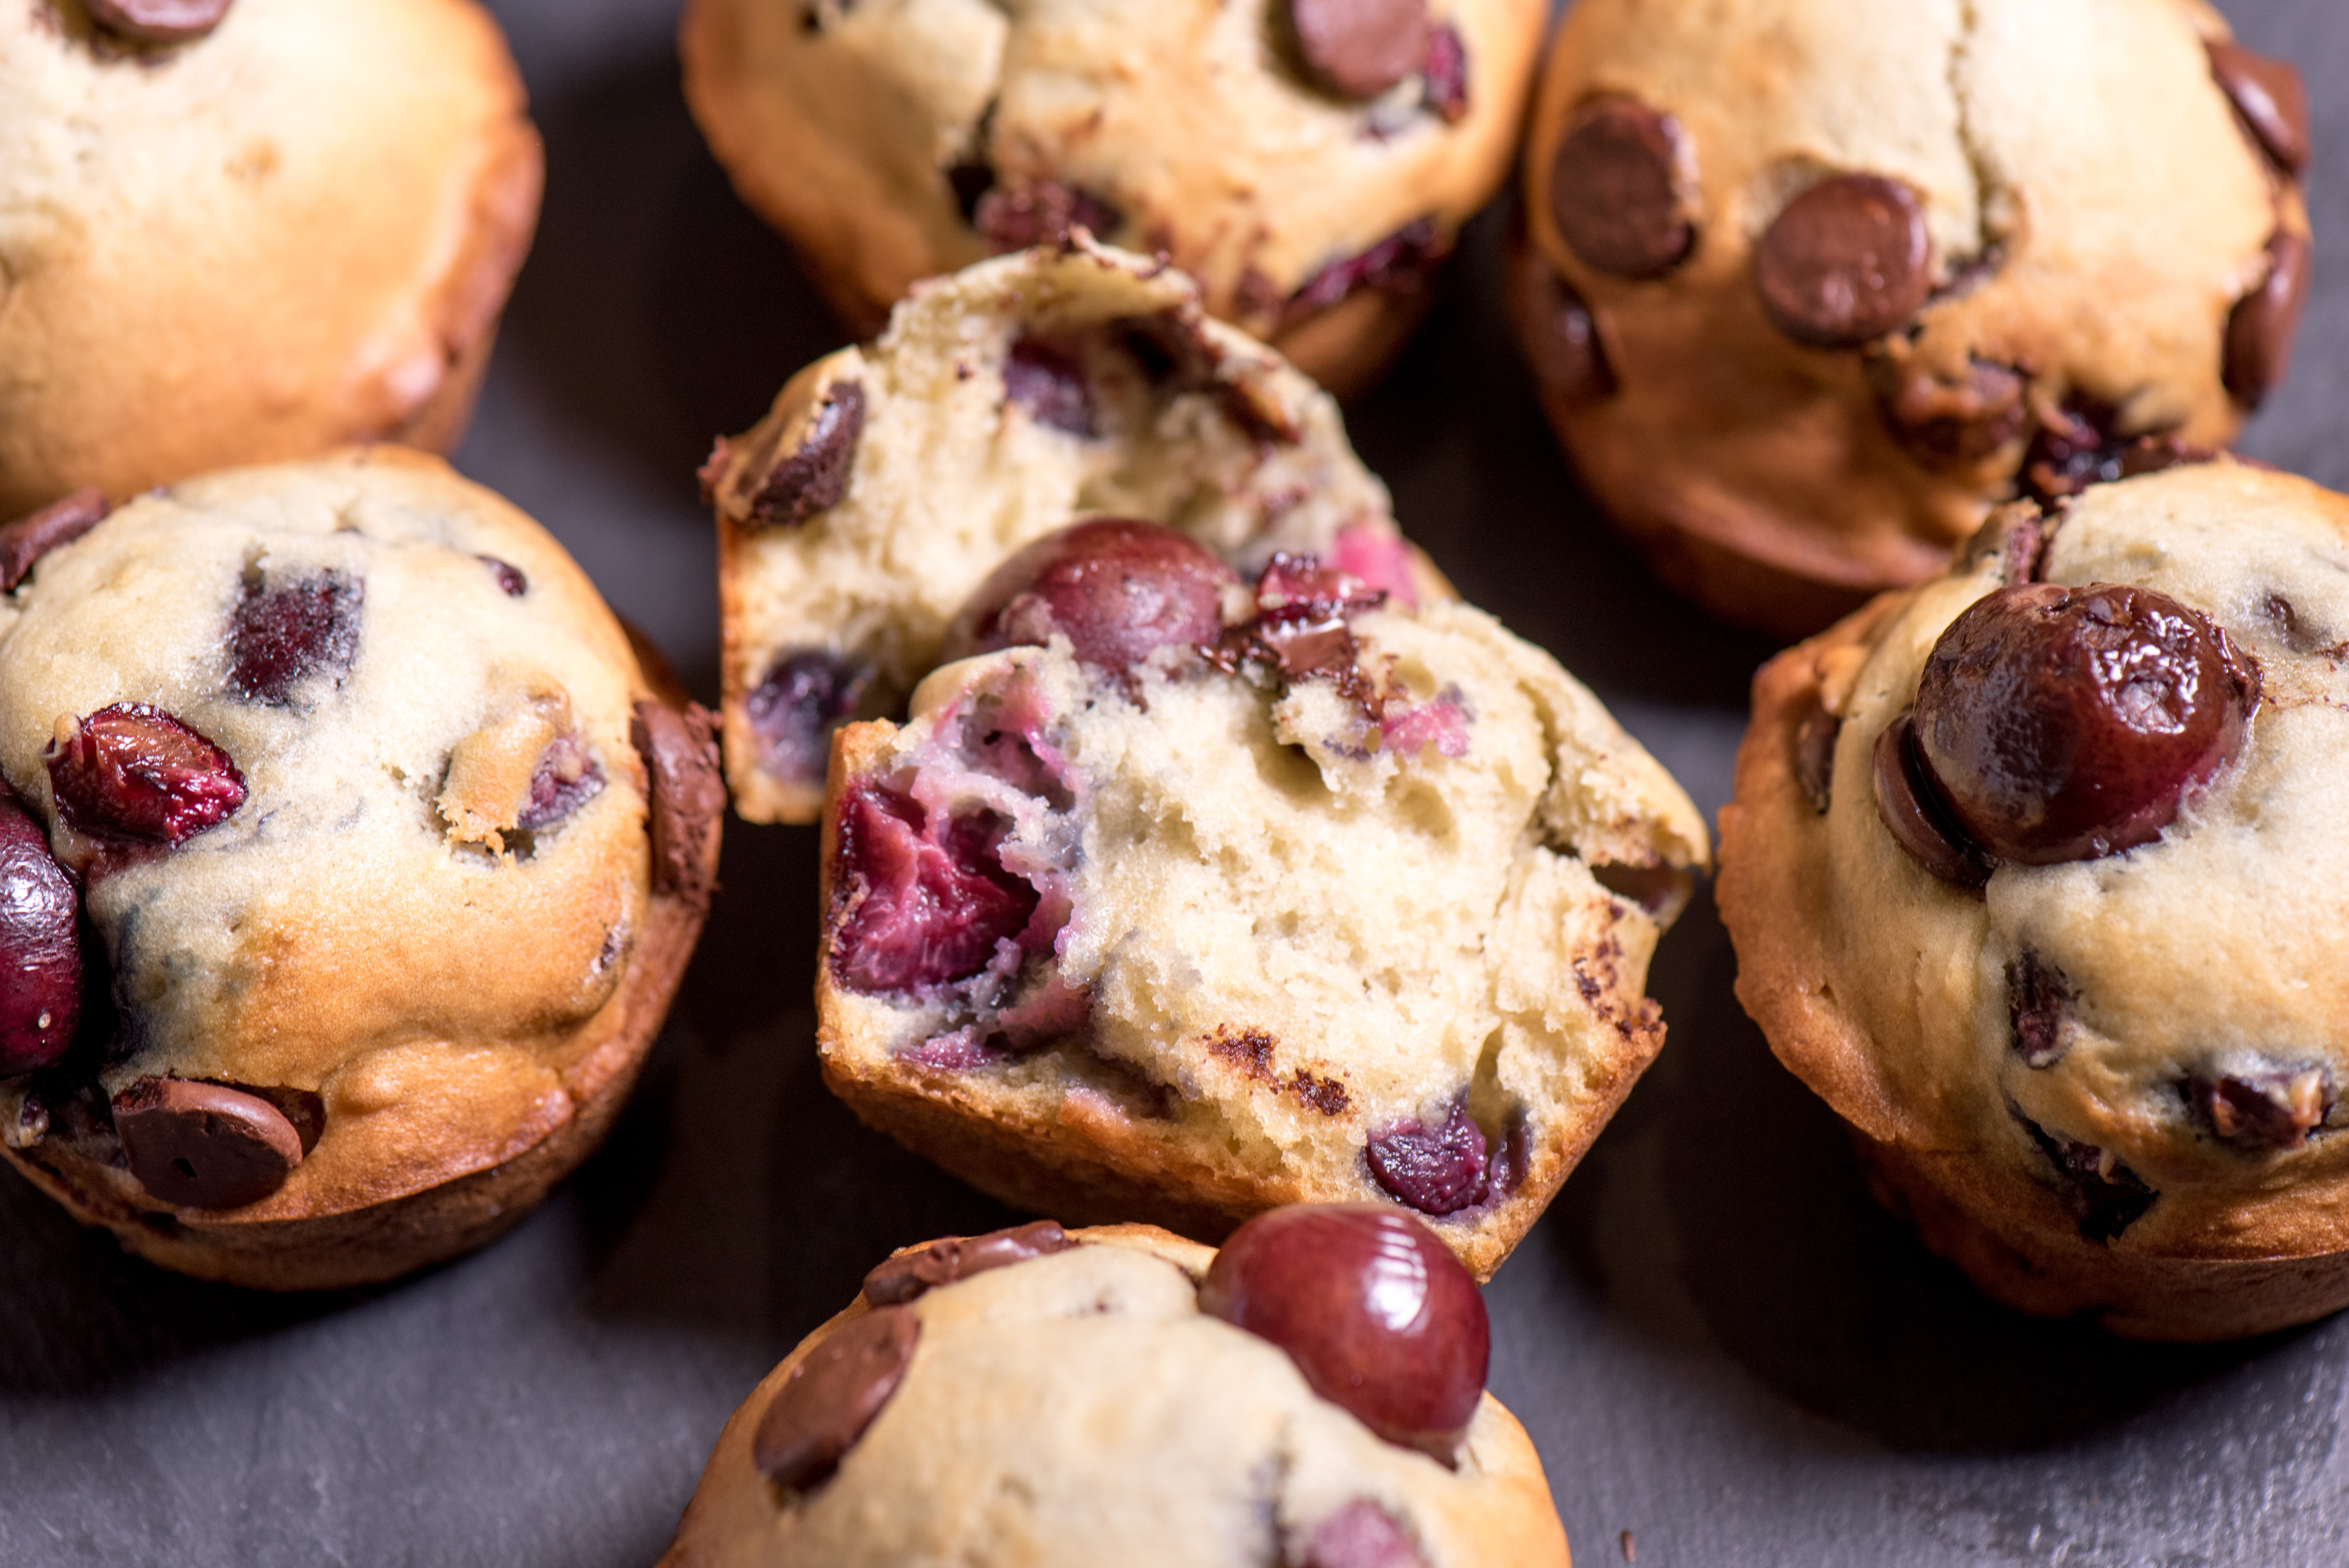 Fresh cherries, rich dark chocolate. What's not to love about these fresh cherry muffins?! | The Recipe Wench